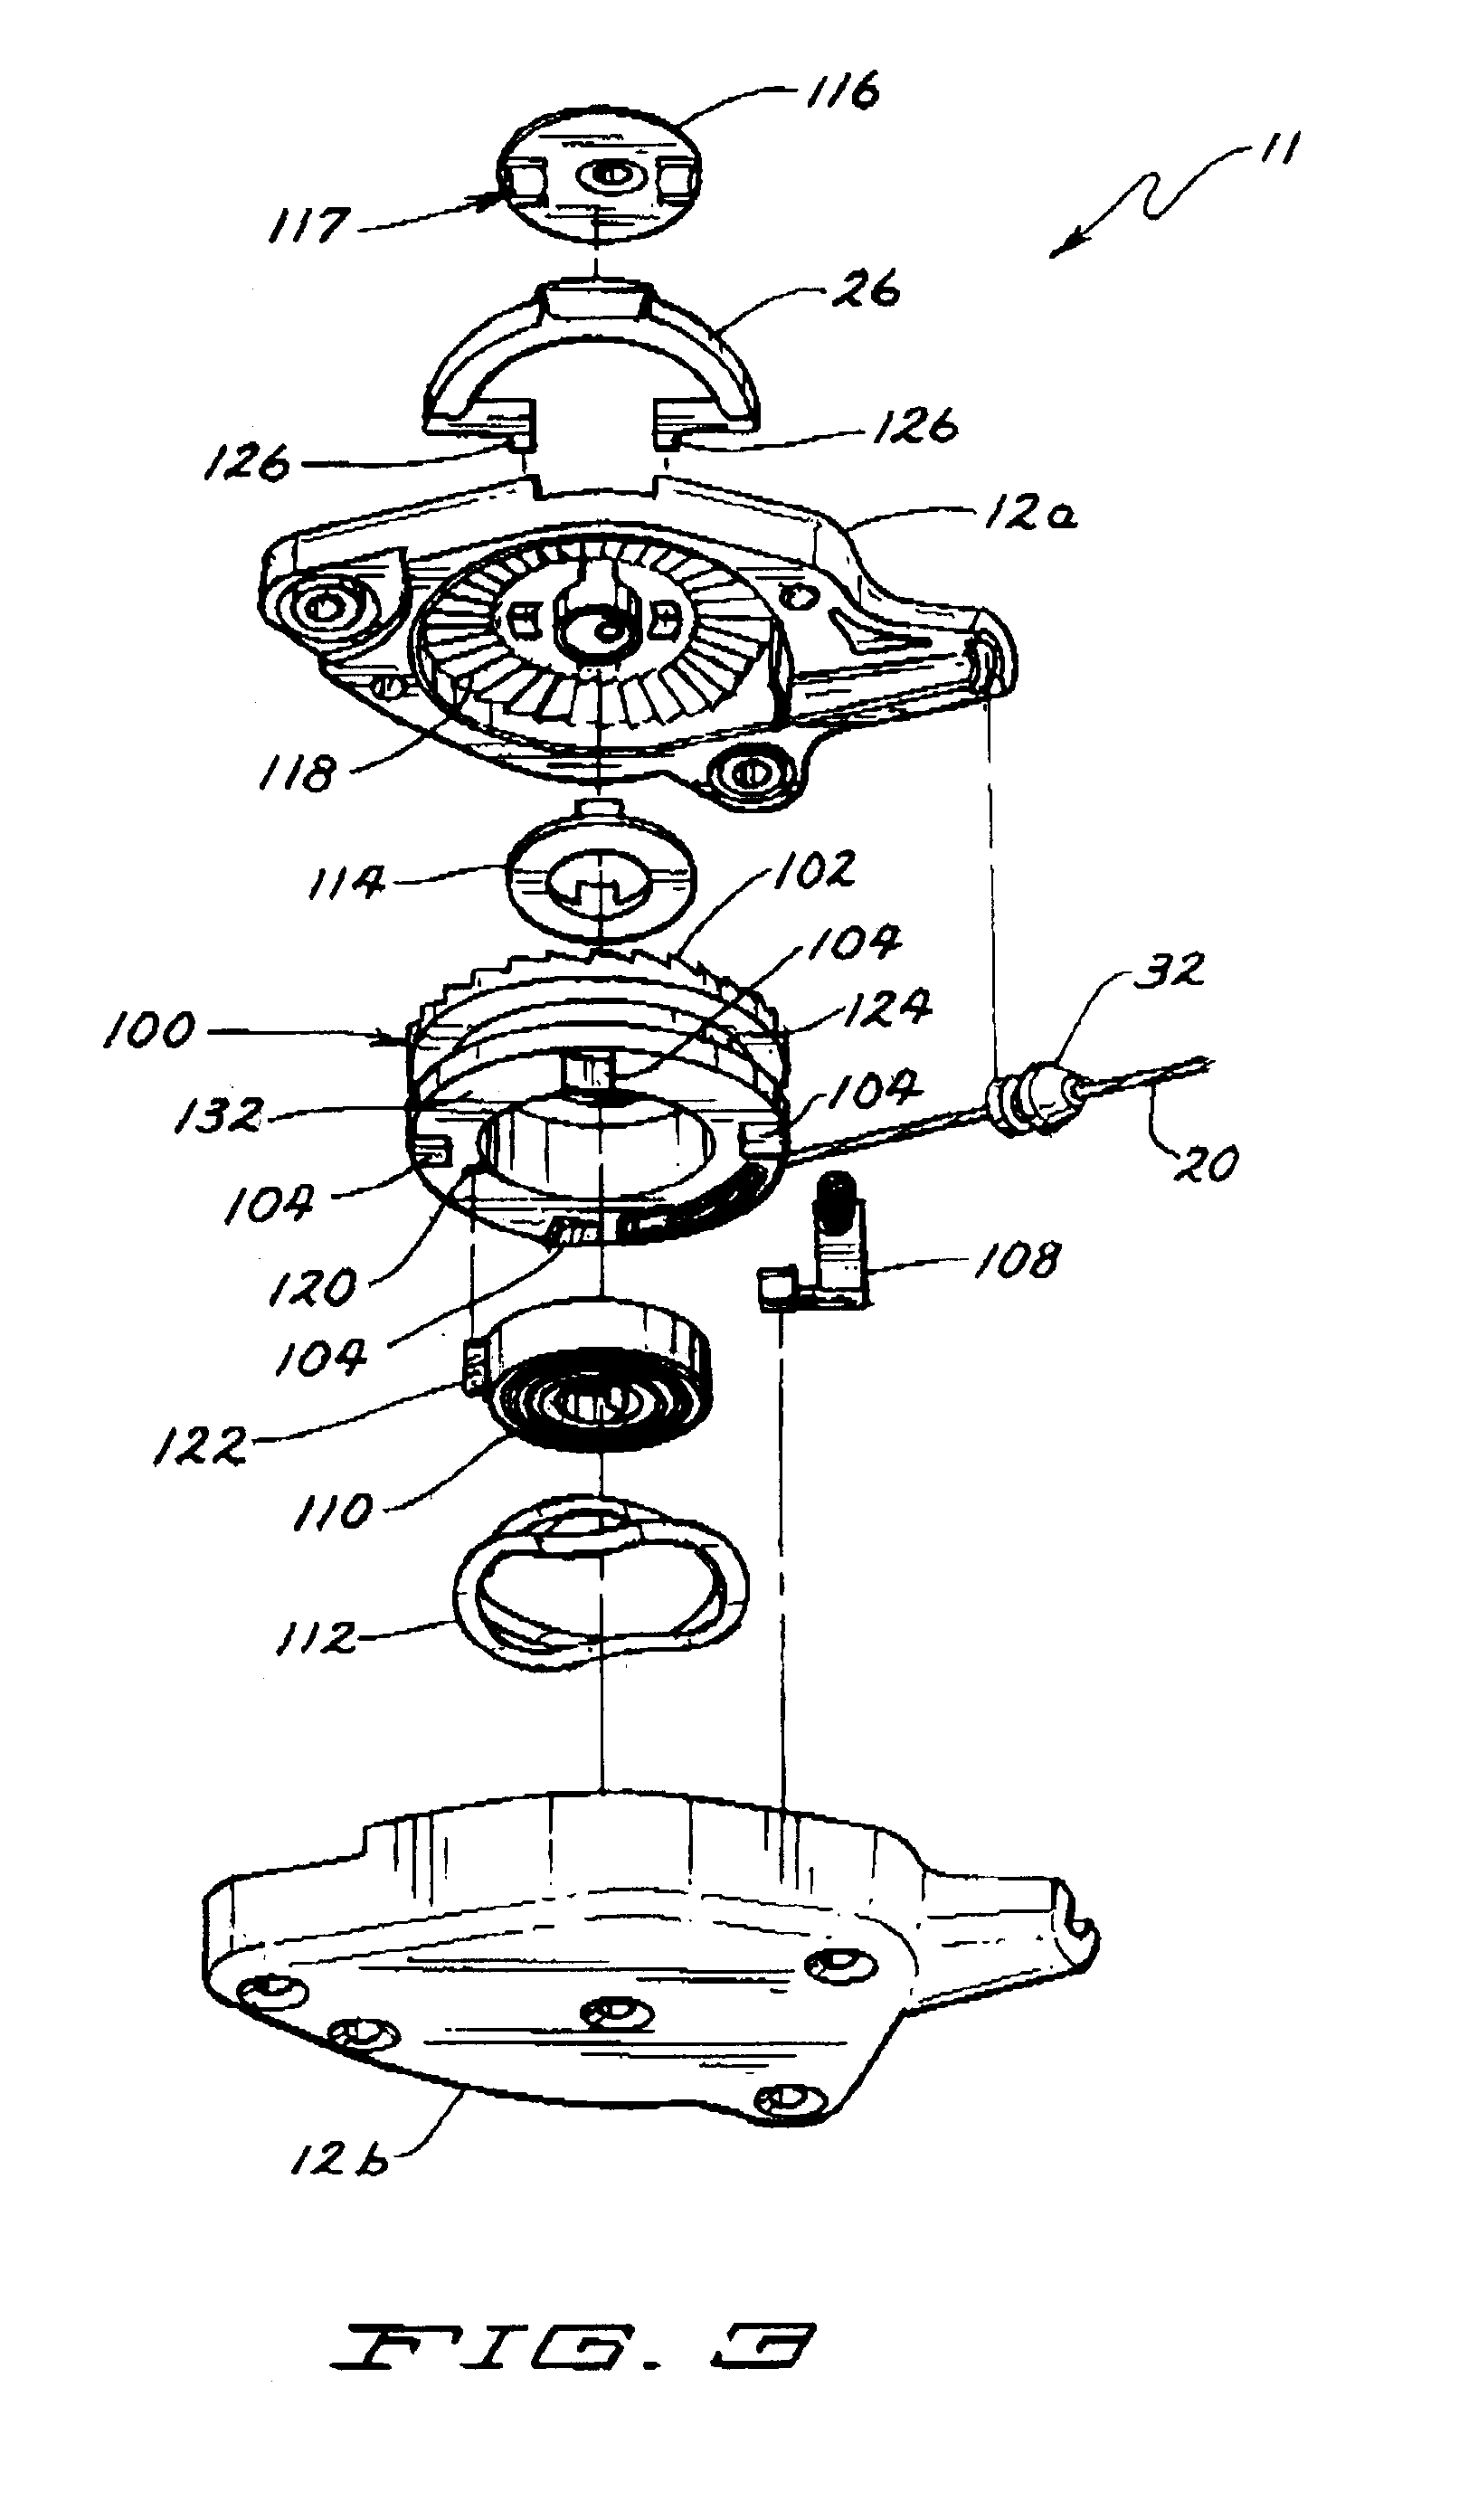 Self-Tightening Snow Chain and Methods of Use